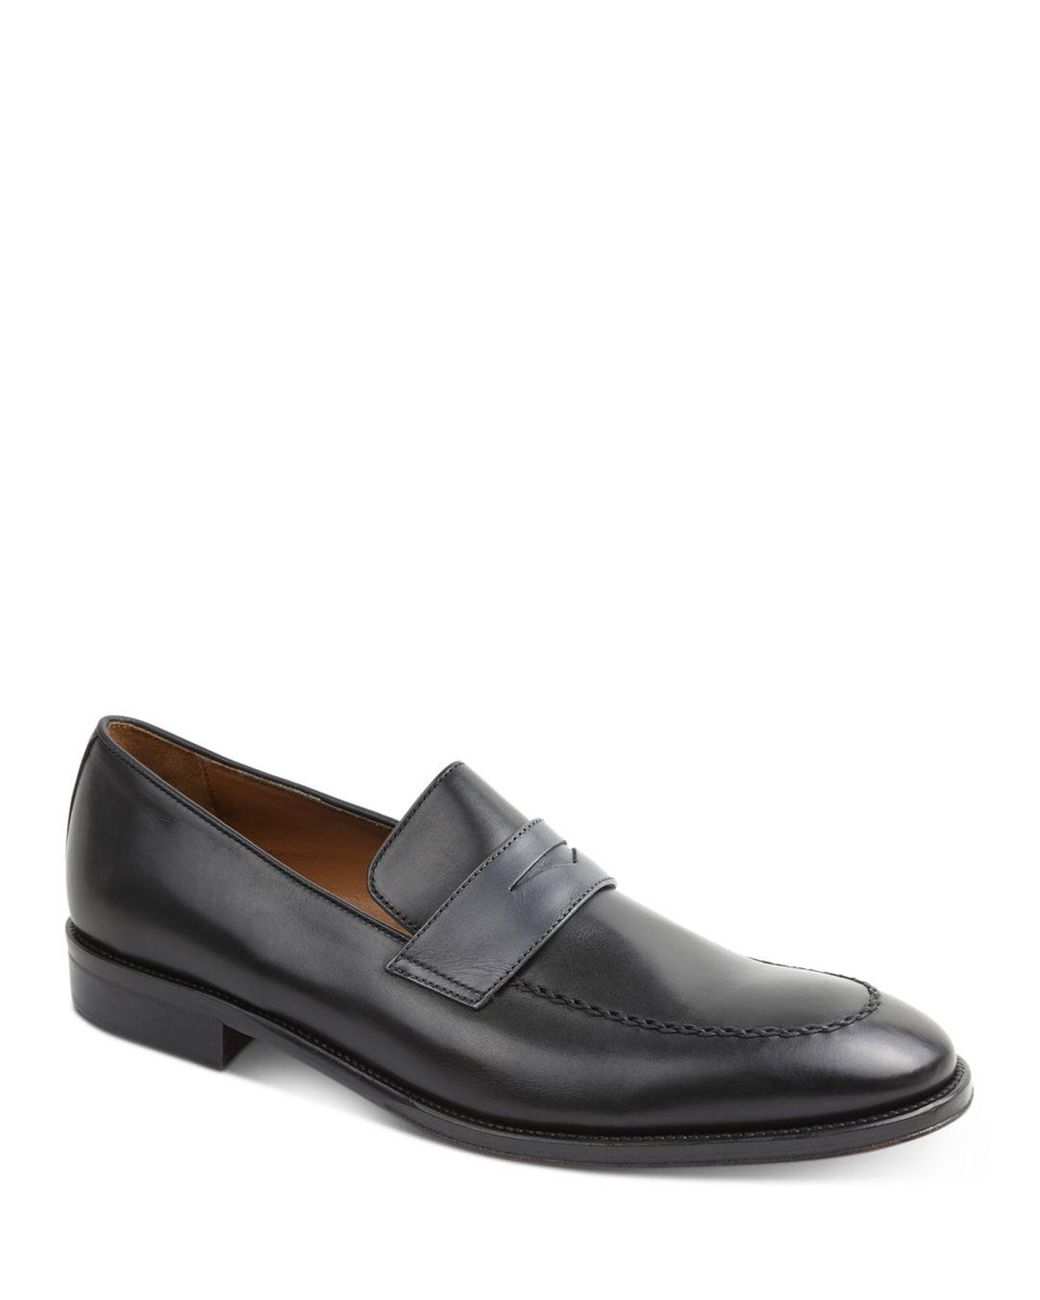 Bruno Magli Men's Arezzo Burnished Leather Penny Loafers in Black/Gray ...